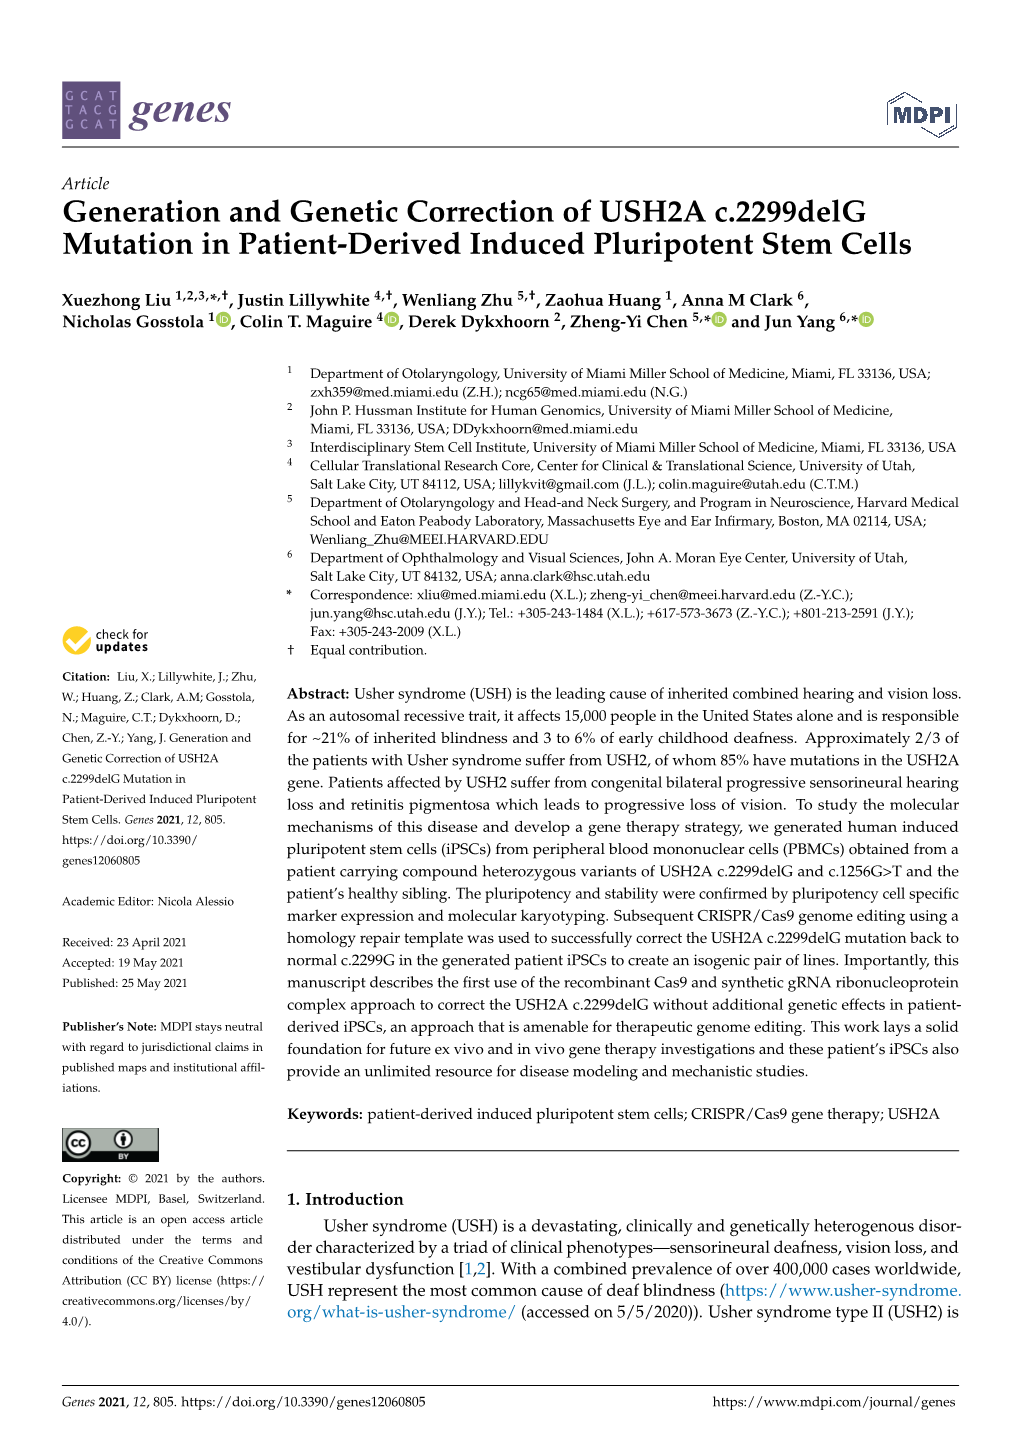 Generation and Genetic Correction of USH2A C.2299Delg Mutation in Patient-Derived Induced Pluripotent Stem Cells